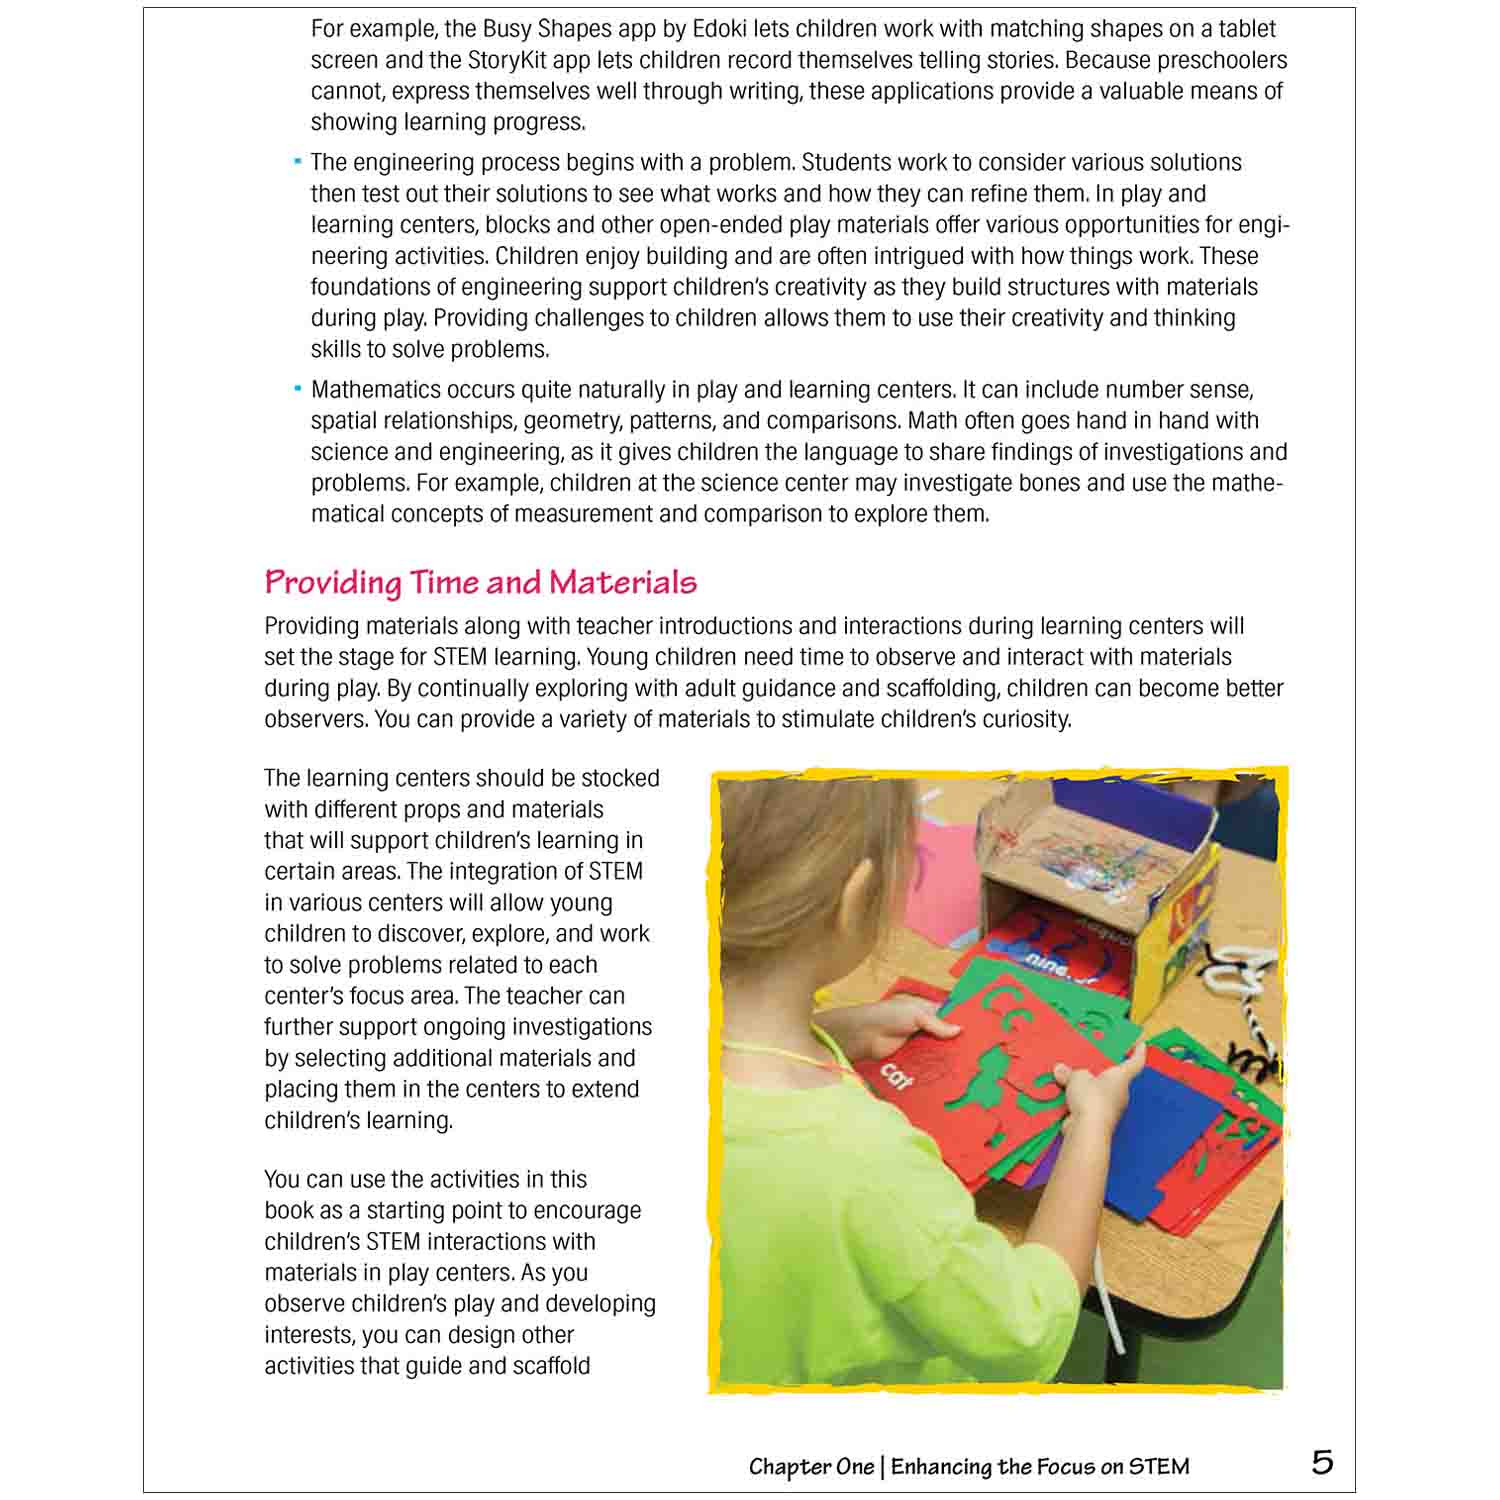 STEM Play: Integrating Inquiry into Learning Centers